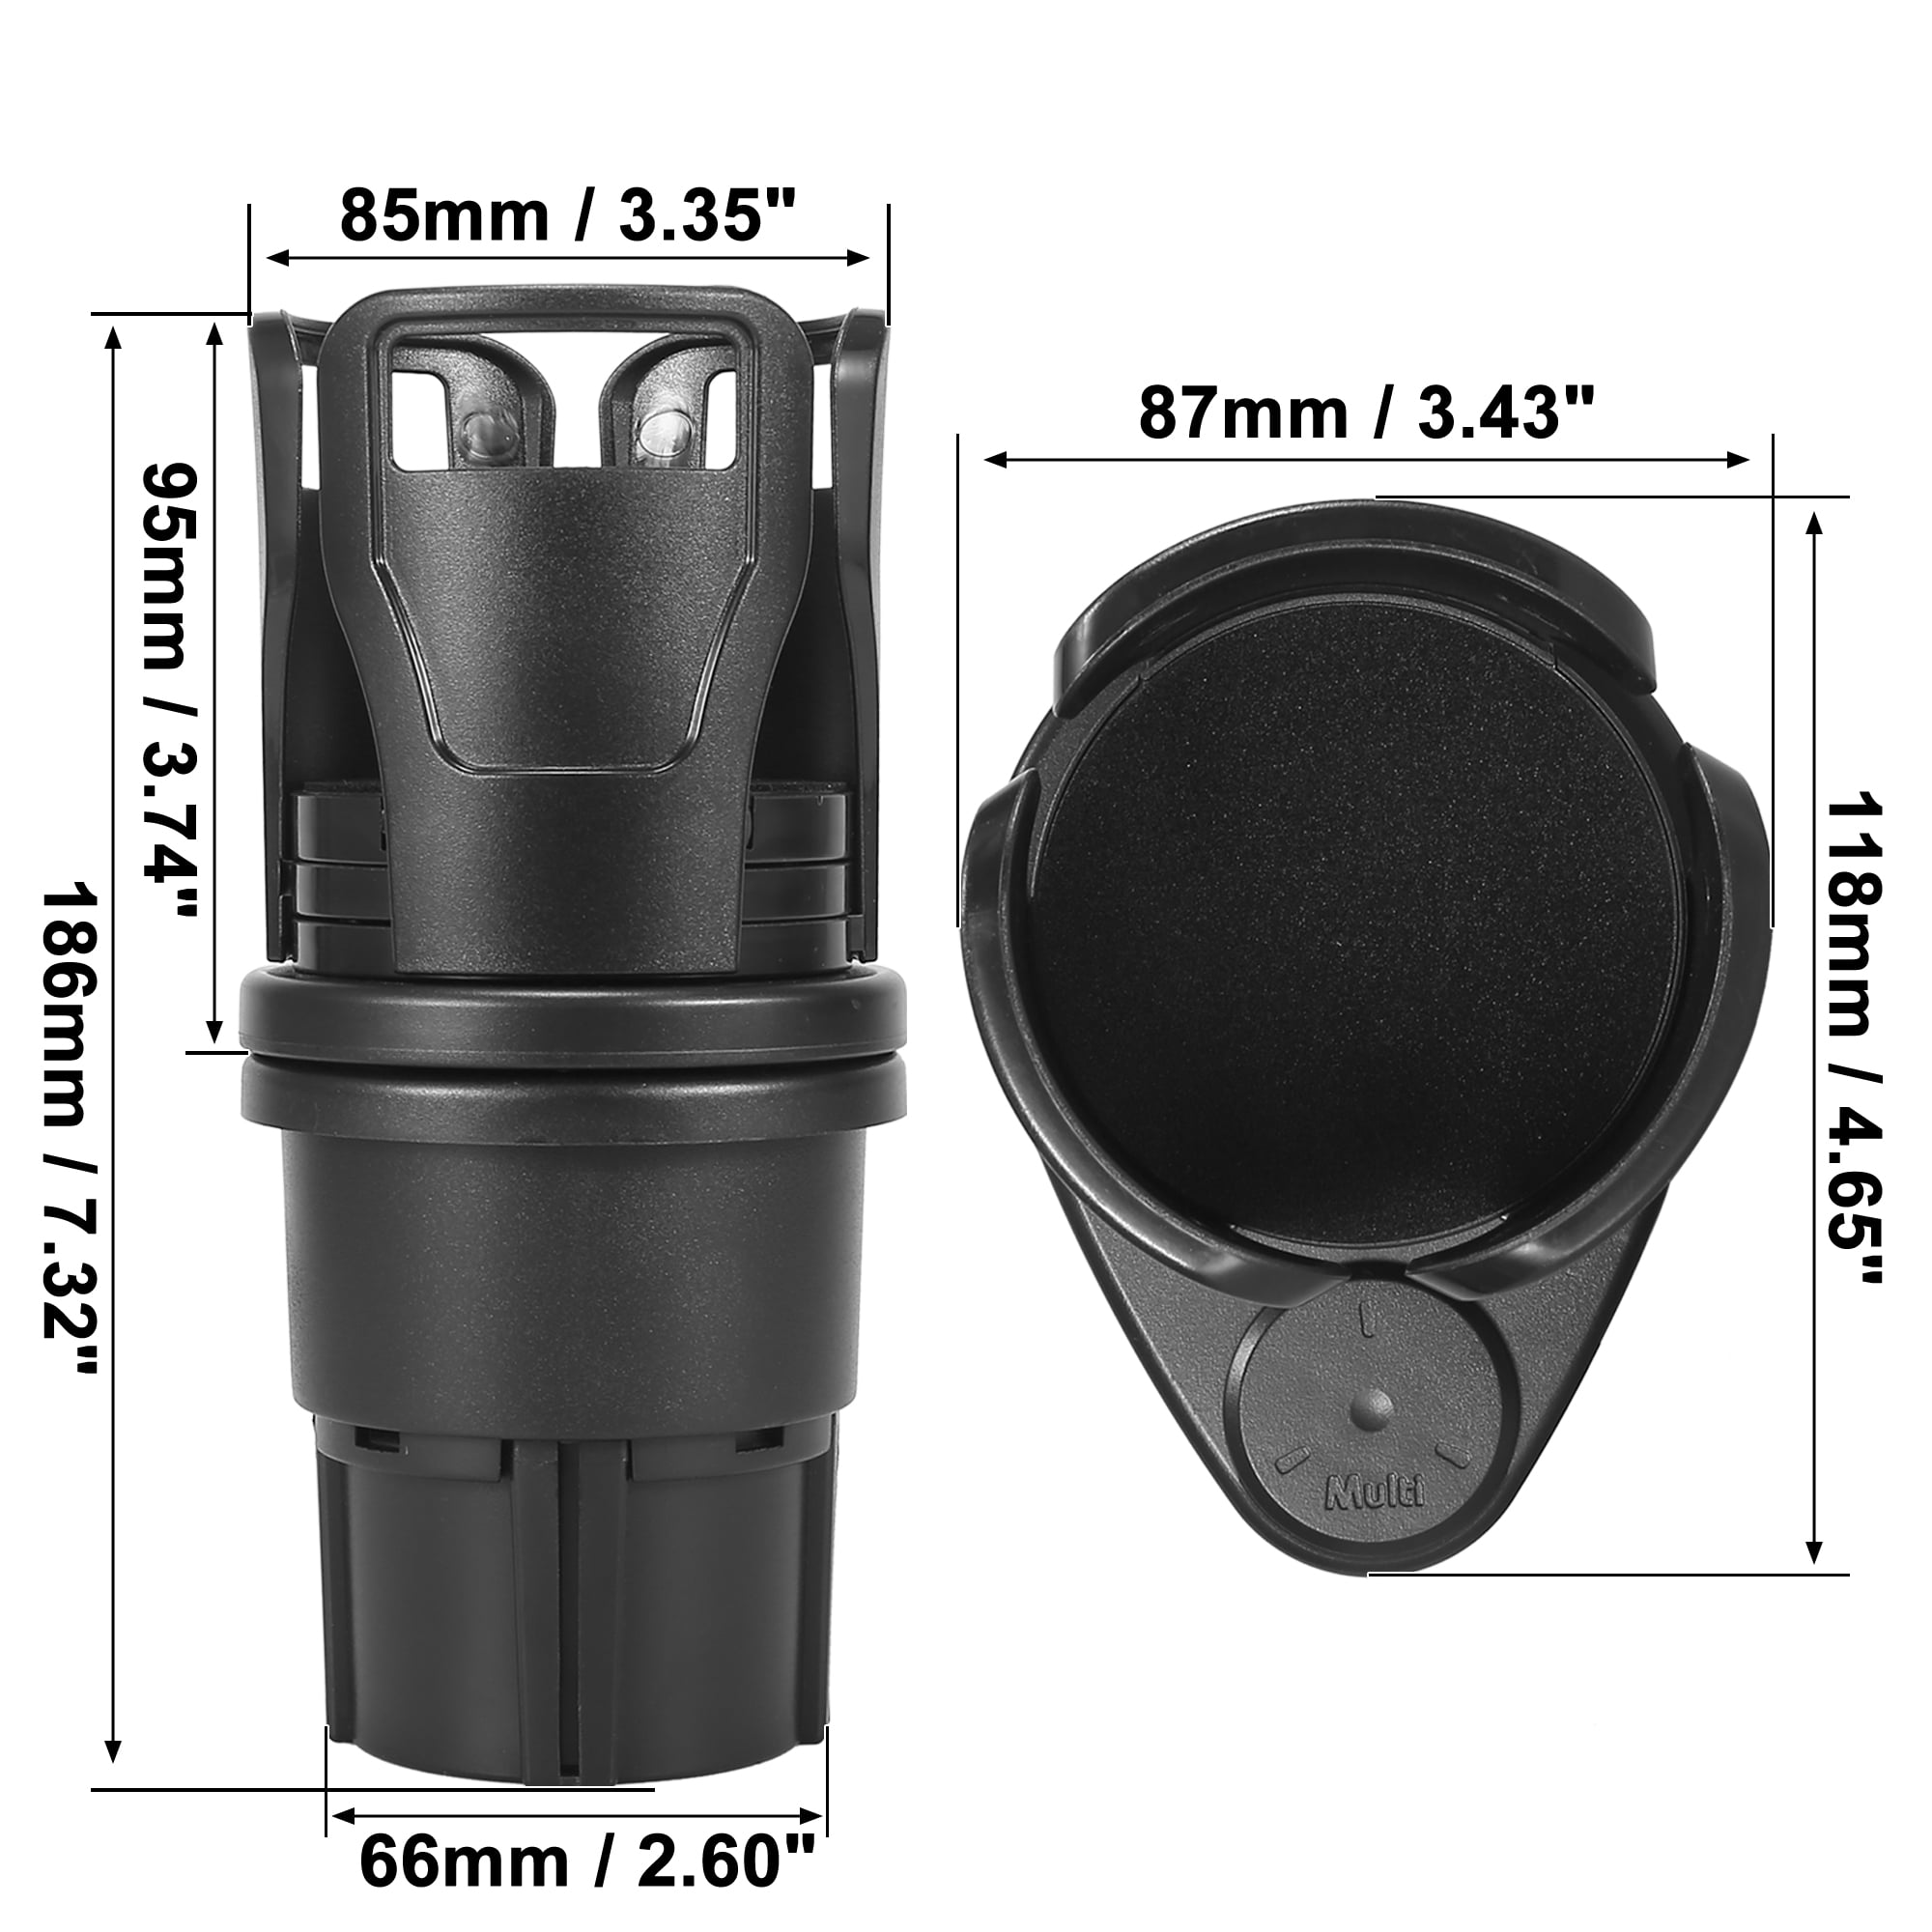 Car Cup Holder Expander Divided into Two Multifunctional Car Bottle Adapter  Organizer Black 